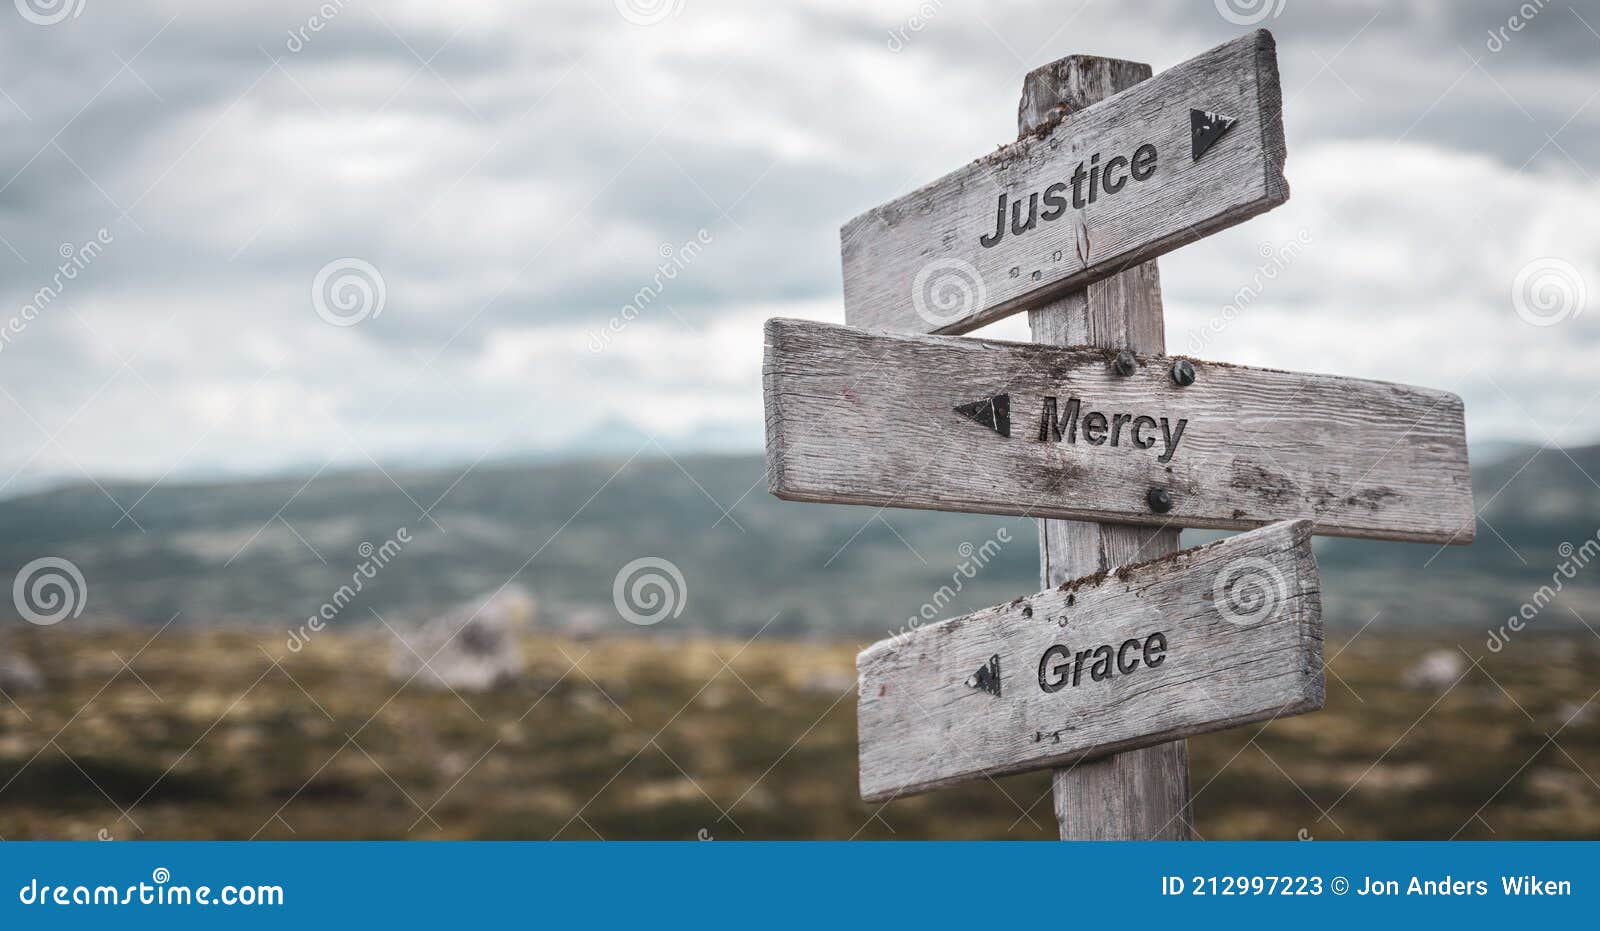 justice mercy grace text engraved on wooden signpost outdoors in nature.